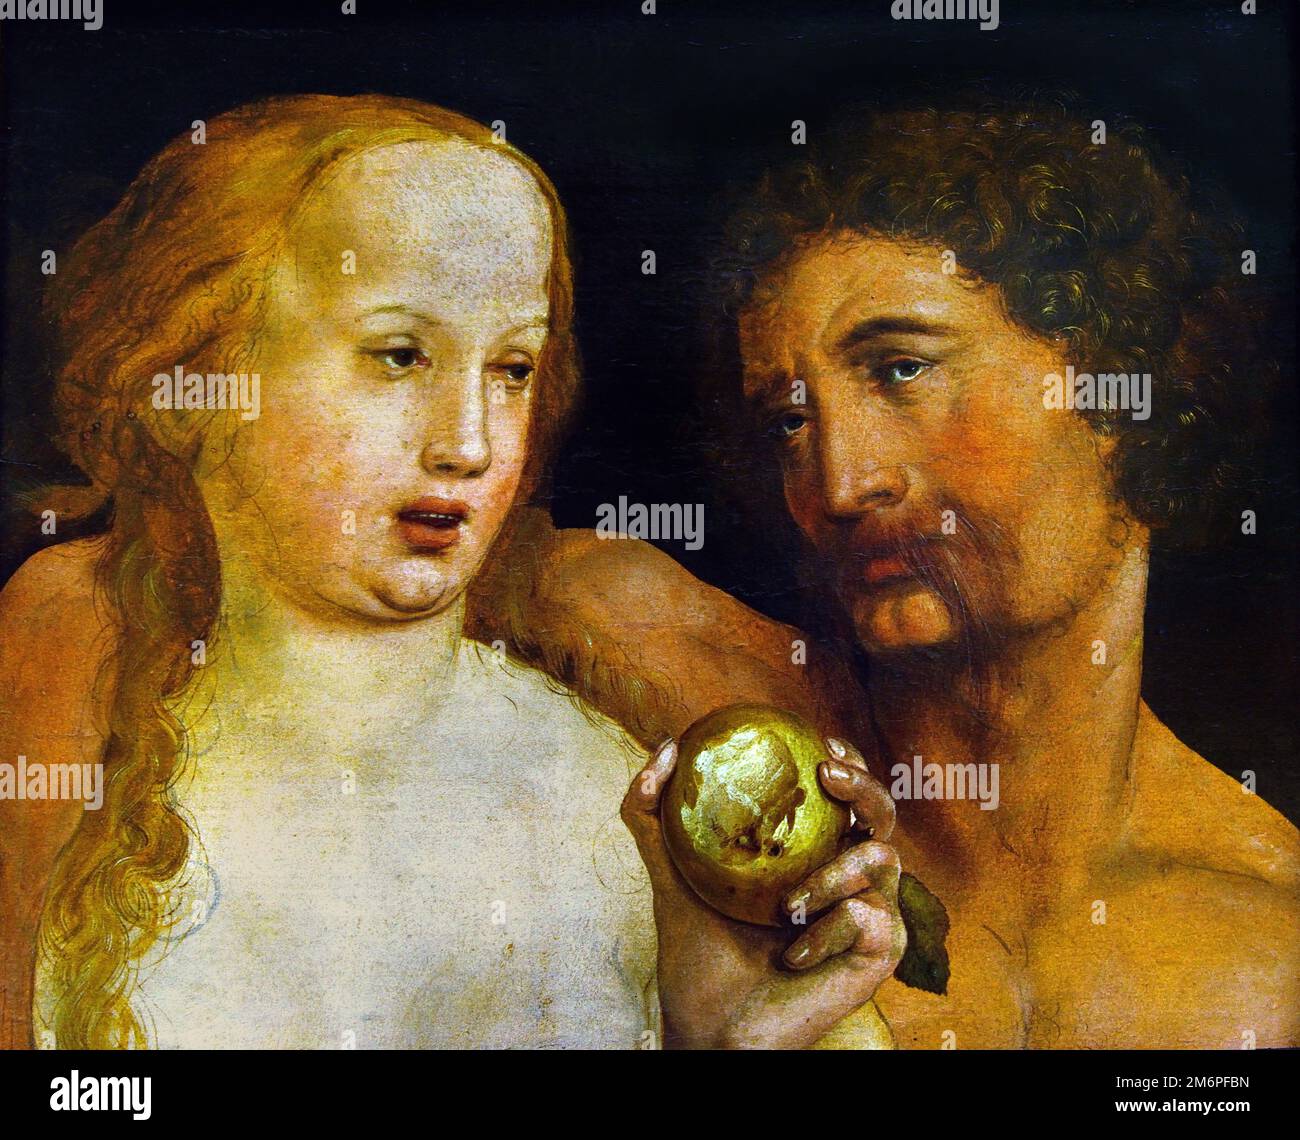 Adam and Eve 1517 by Hans Holbein (the Younger) 1497-1543, German Germany Adam and Eve, Garden of Eden, Paradise, Adam , Eve, God, Expulsion from paradise, Tree of Knowledge , Fall of Man, Apple, Snake, Stock Photo